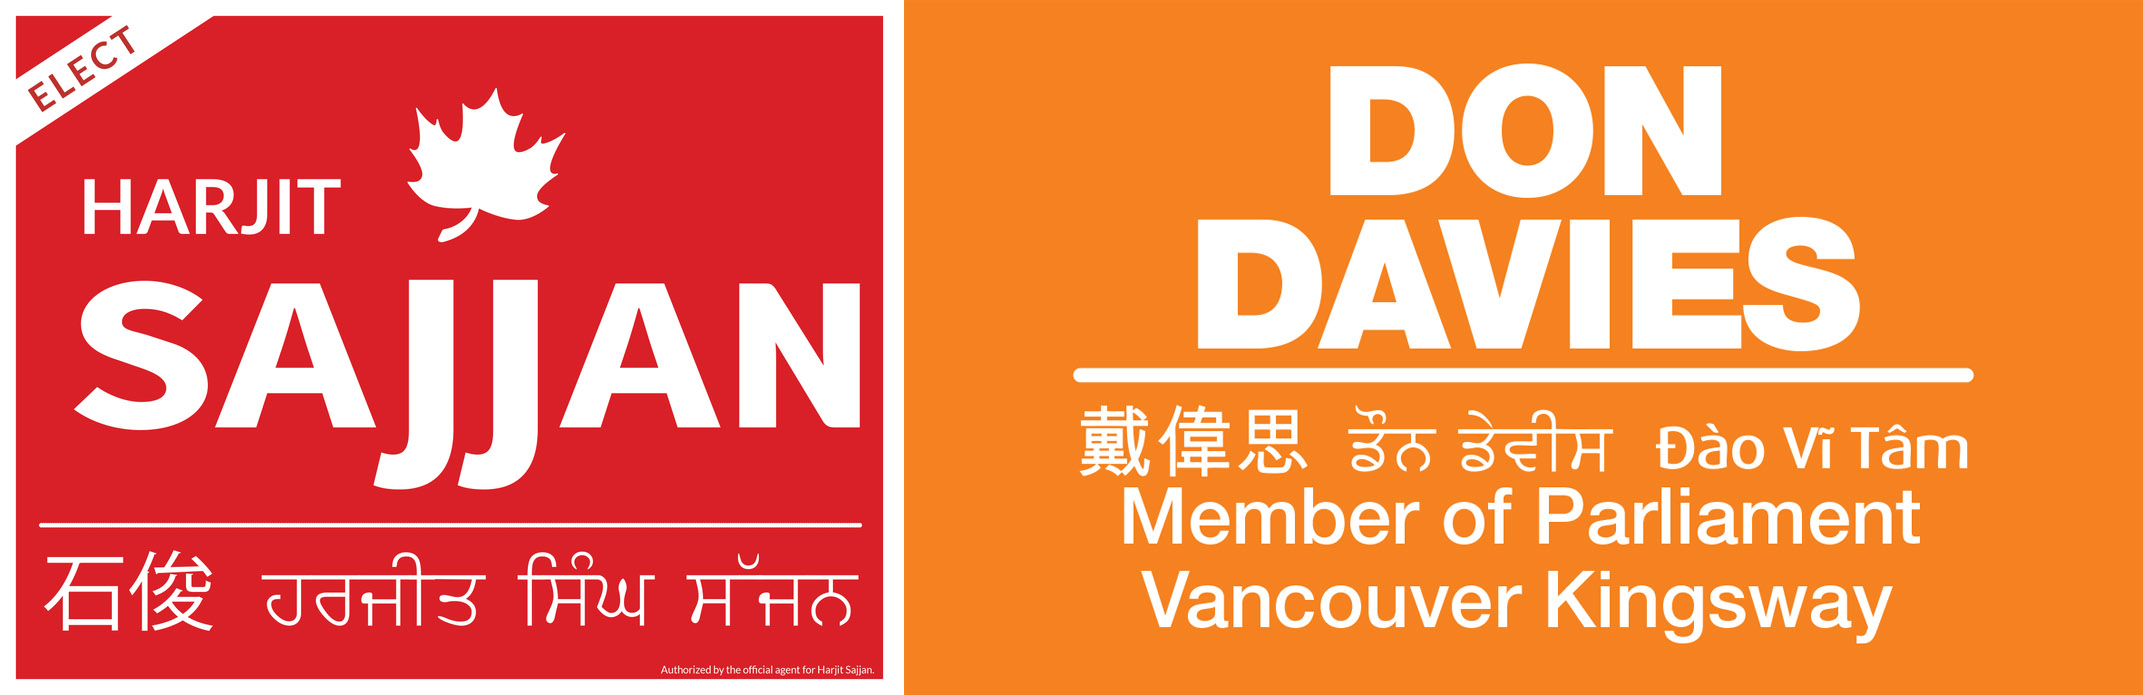 The red Liberal poster for Harjjit Sajjan (with Latin characters, a Punjabi name and a Chinese name) and the orange NDP poster for Don Davies (with Latin characters, a Chinese name, a Punjabi name and a Vietnamese name).